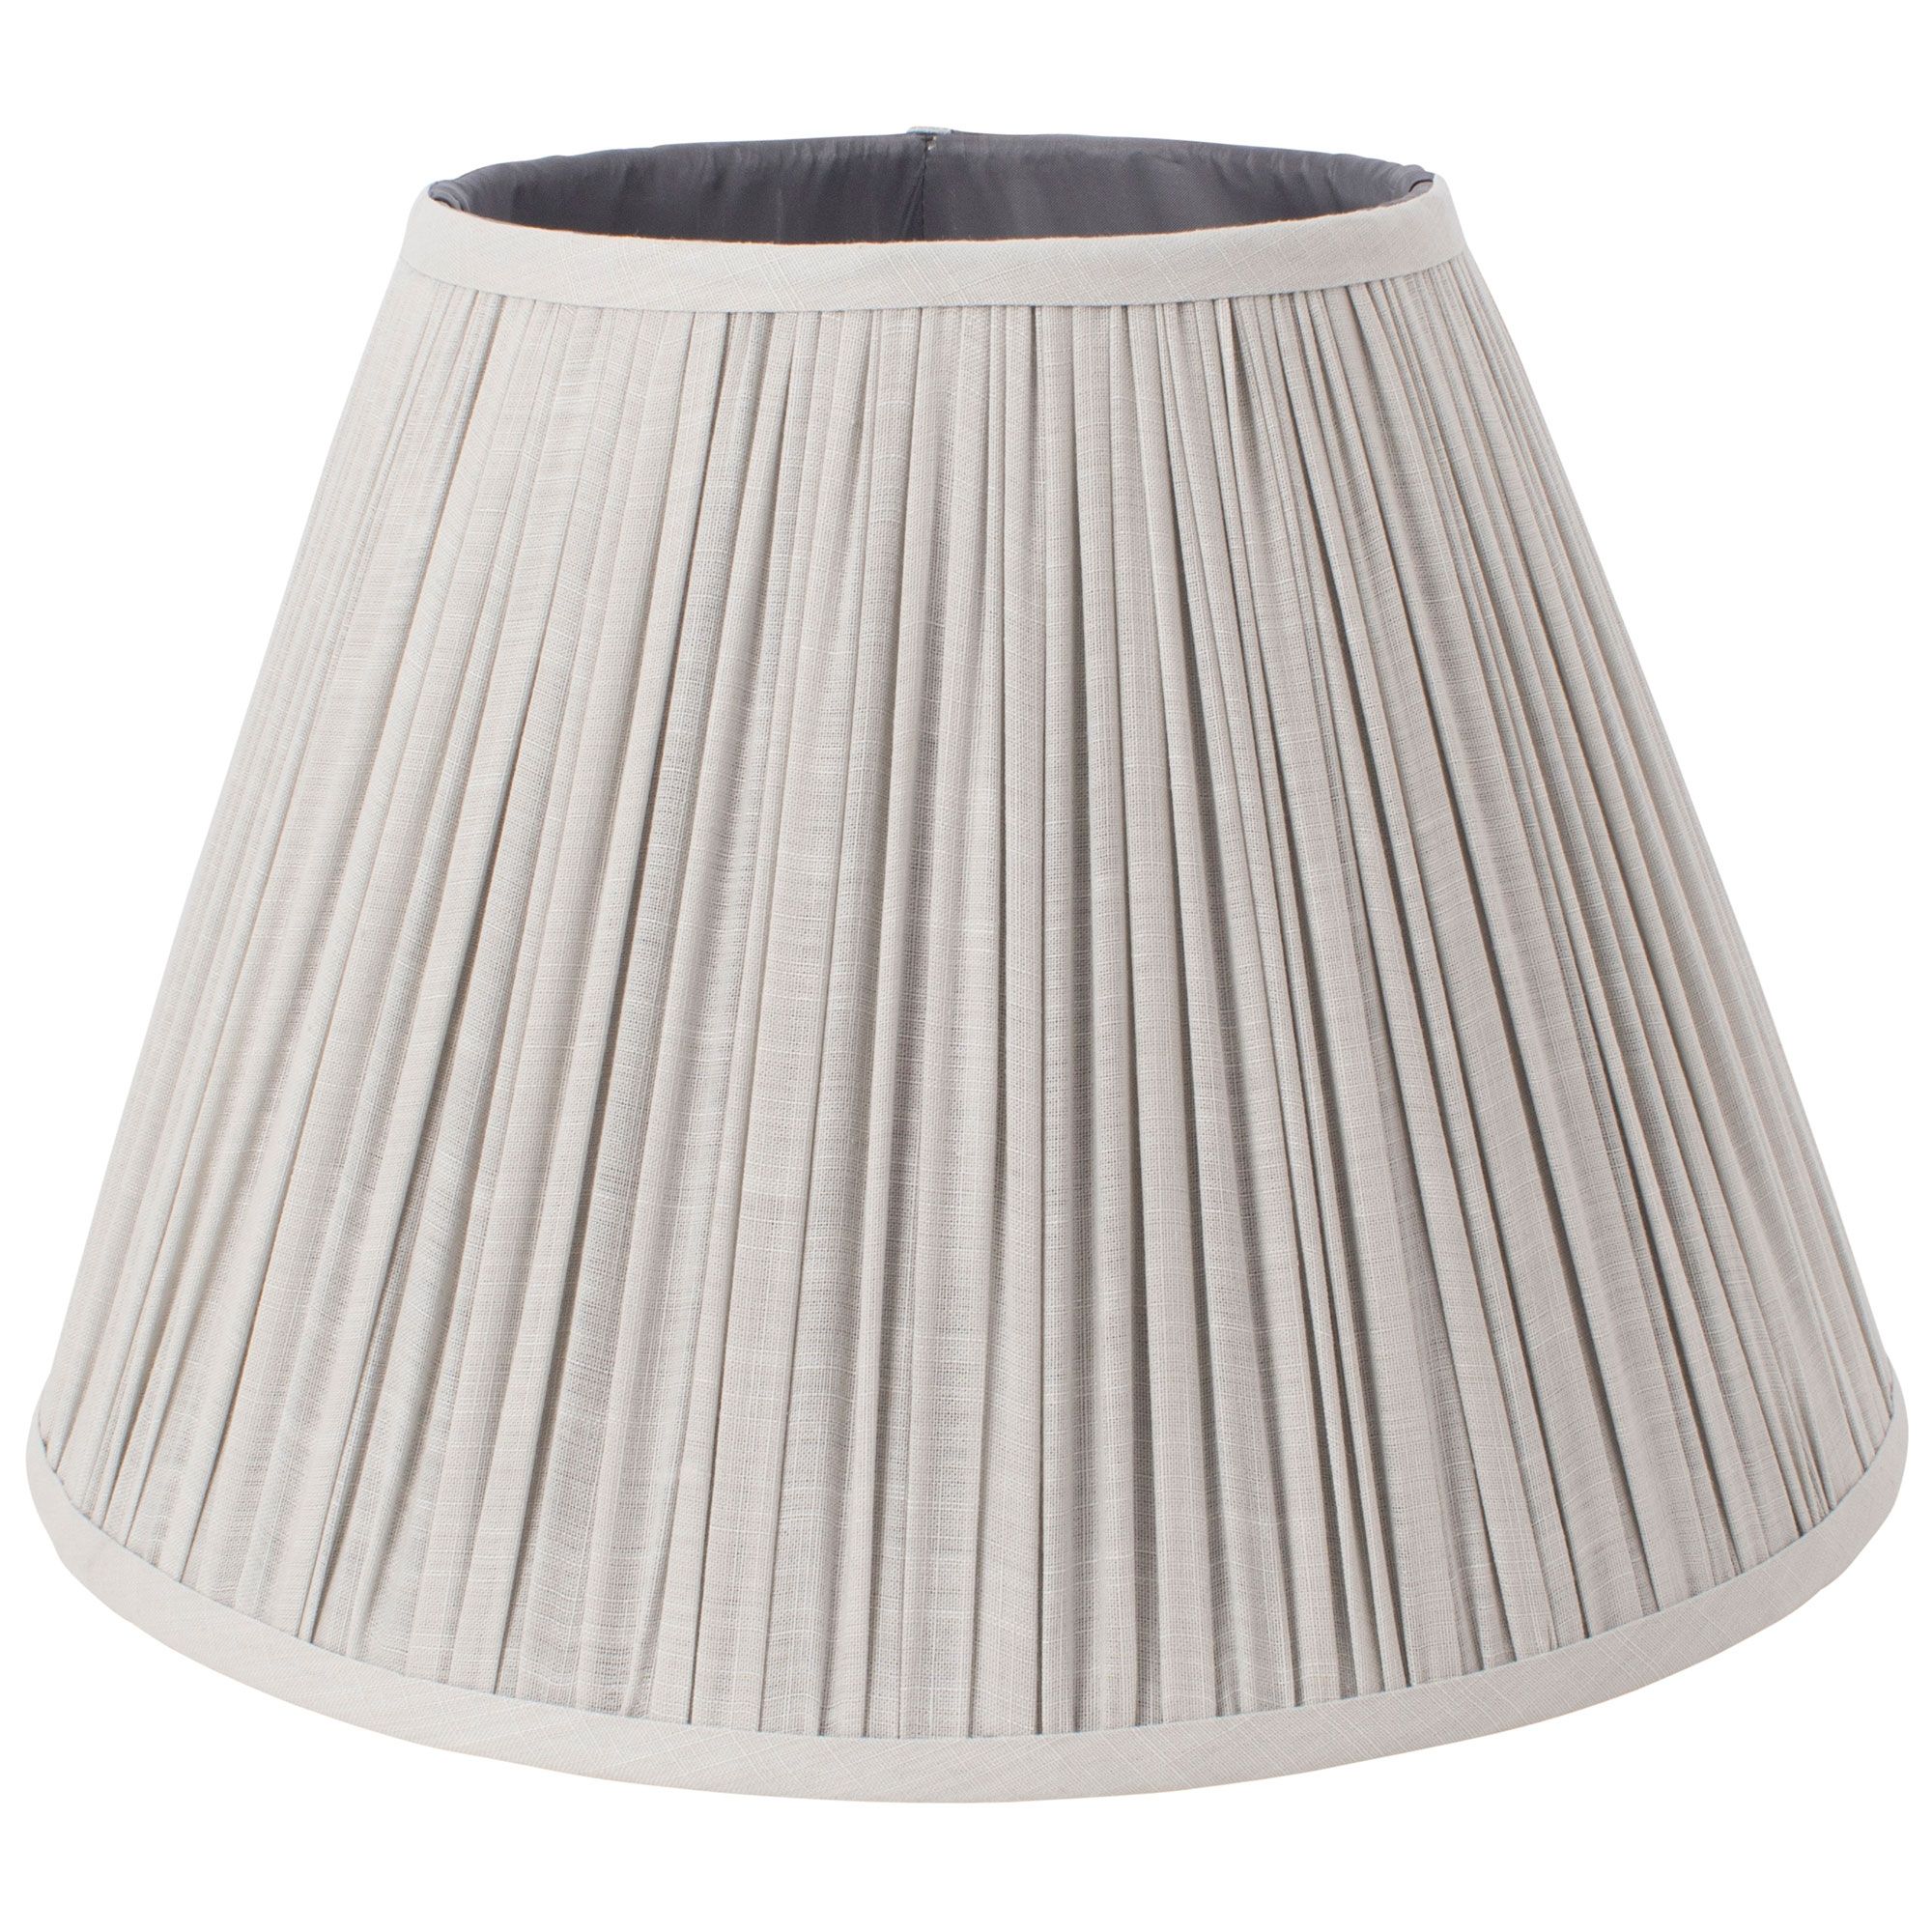 Our charming Mushroom lampshade lends traditional design to versatile appeal. This easy-fit shade is a tapered shape with elegant pleating detail in dark grey. Seamlessly attach to your existing light fitting for an instant refresh to your space. Ideal for a living room or bedrooms. Height: 24cm
Diameter: 36cm